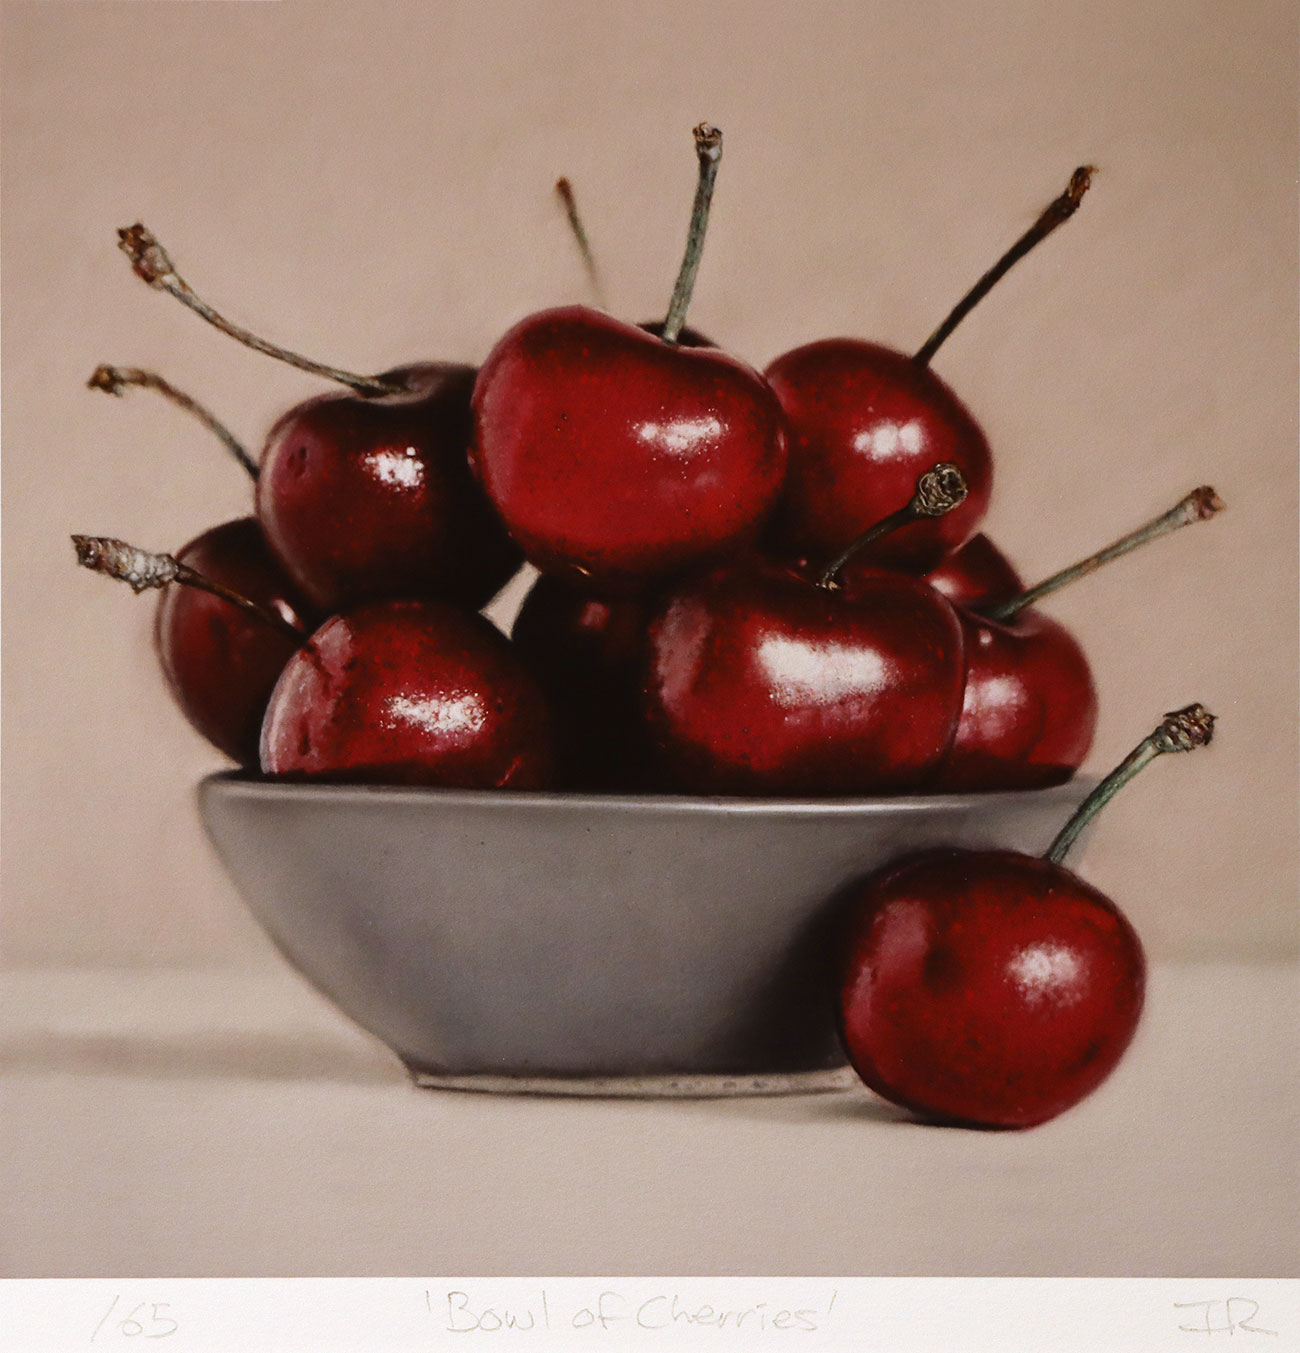 Ian Rawling, Signed limited edition print, Bowl of Cherries. Click to enlarge